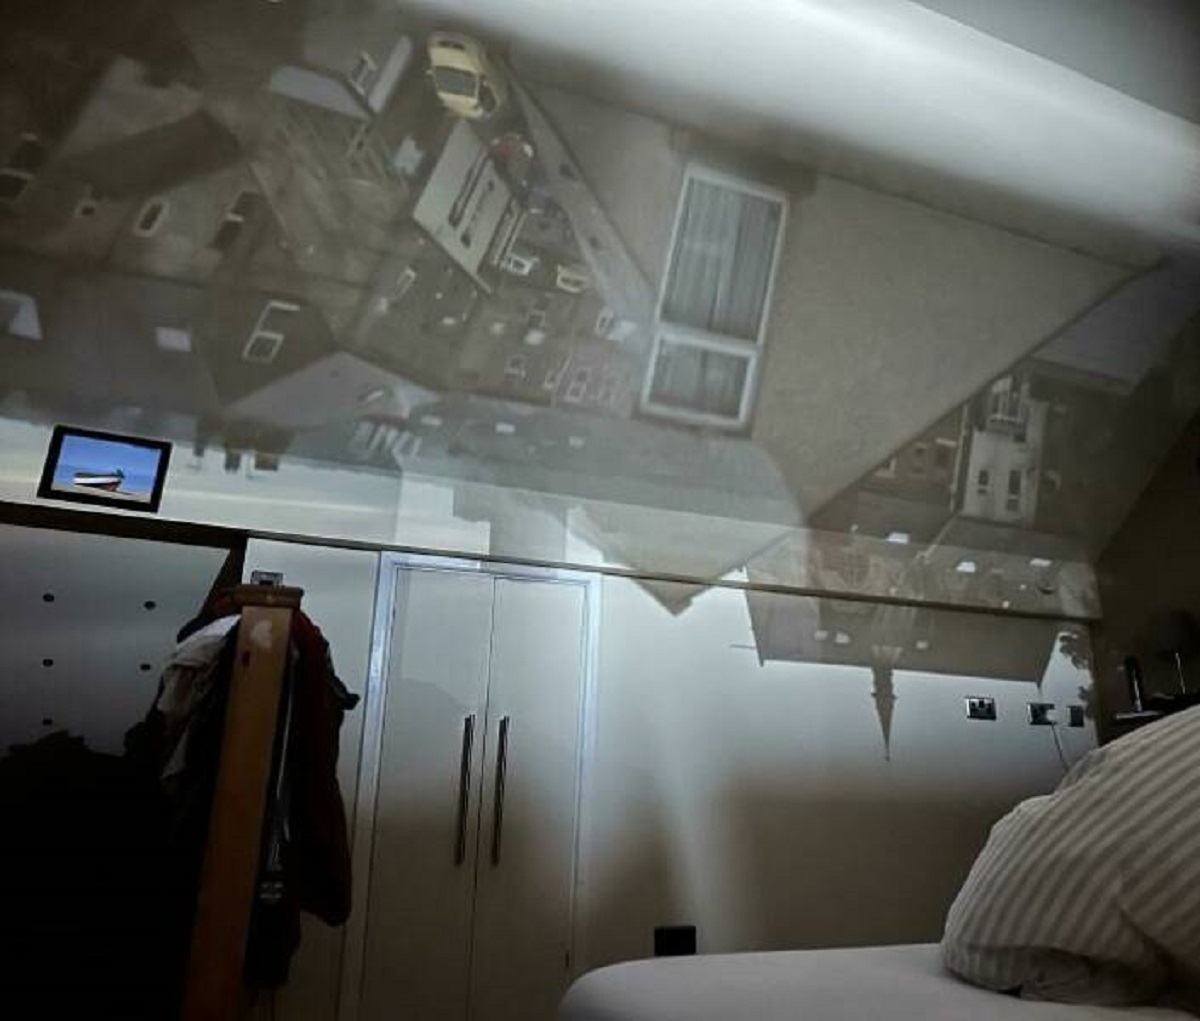 "When My Blind Is Open Just The Right Amount, My Bedroom Becomes A Giant Pinhole Camera"